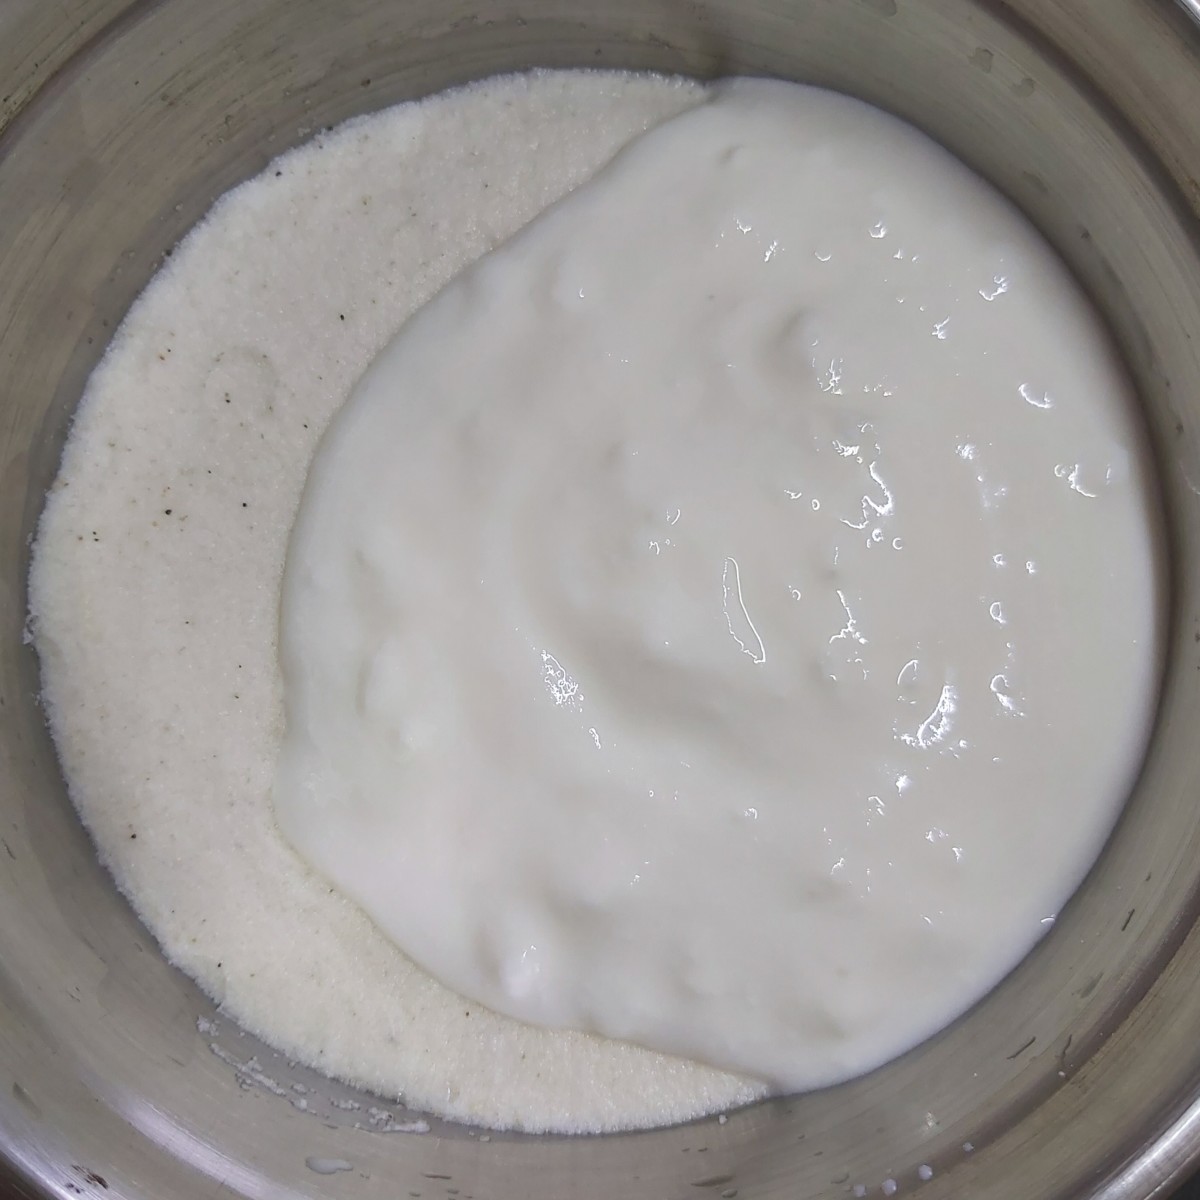 Add 1/3 cup of curd.